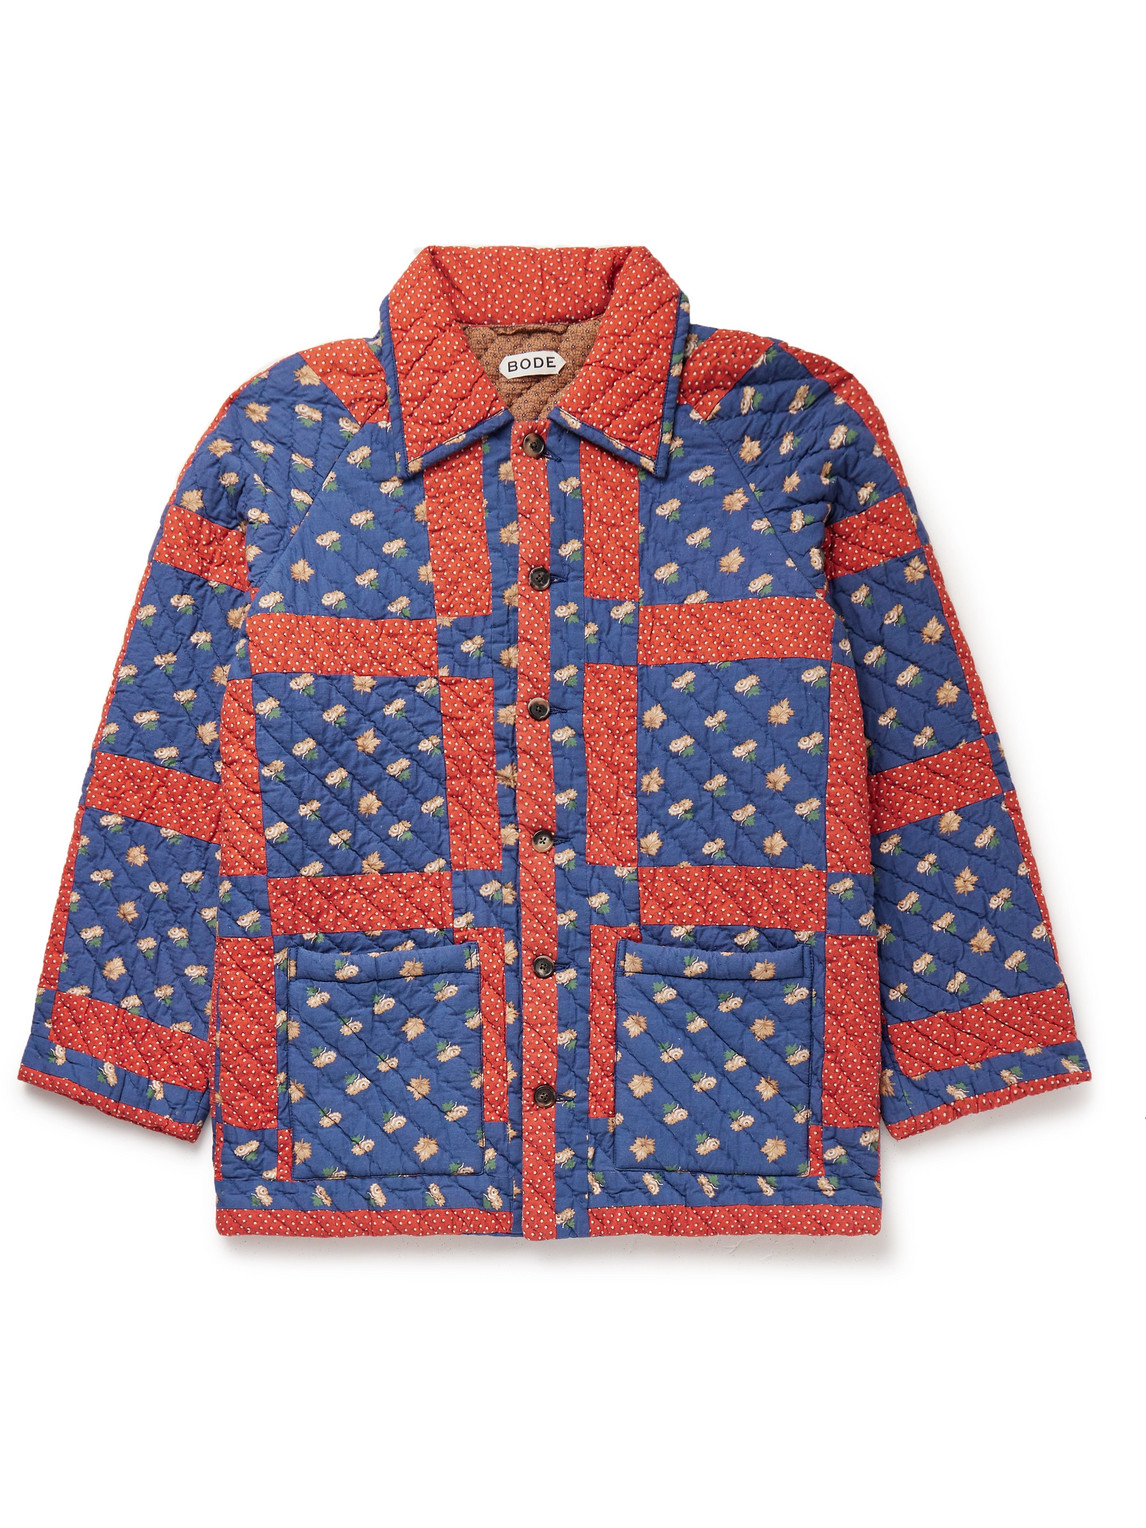 Bode Sheepfold Quilted Padded Printed Cotton Jacket In Blue